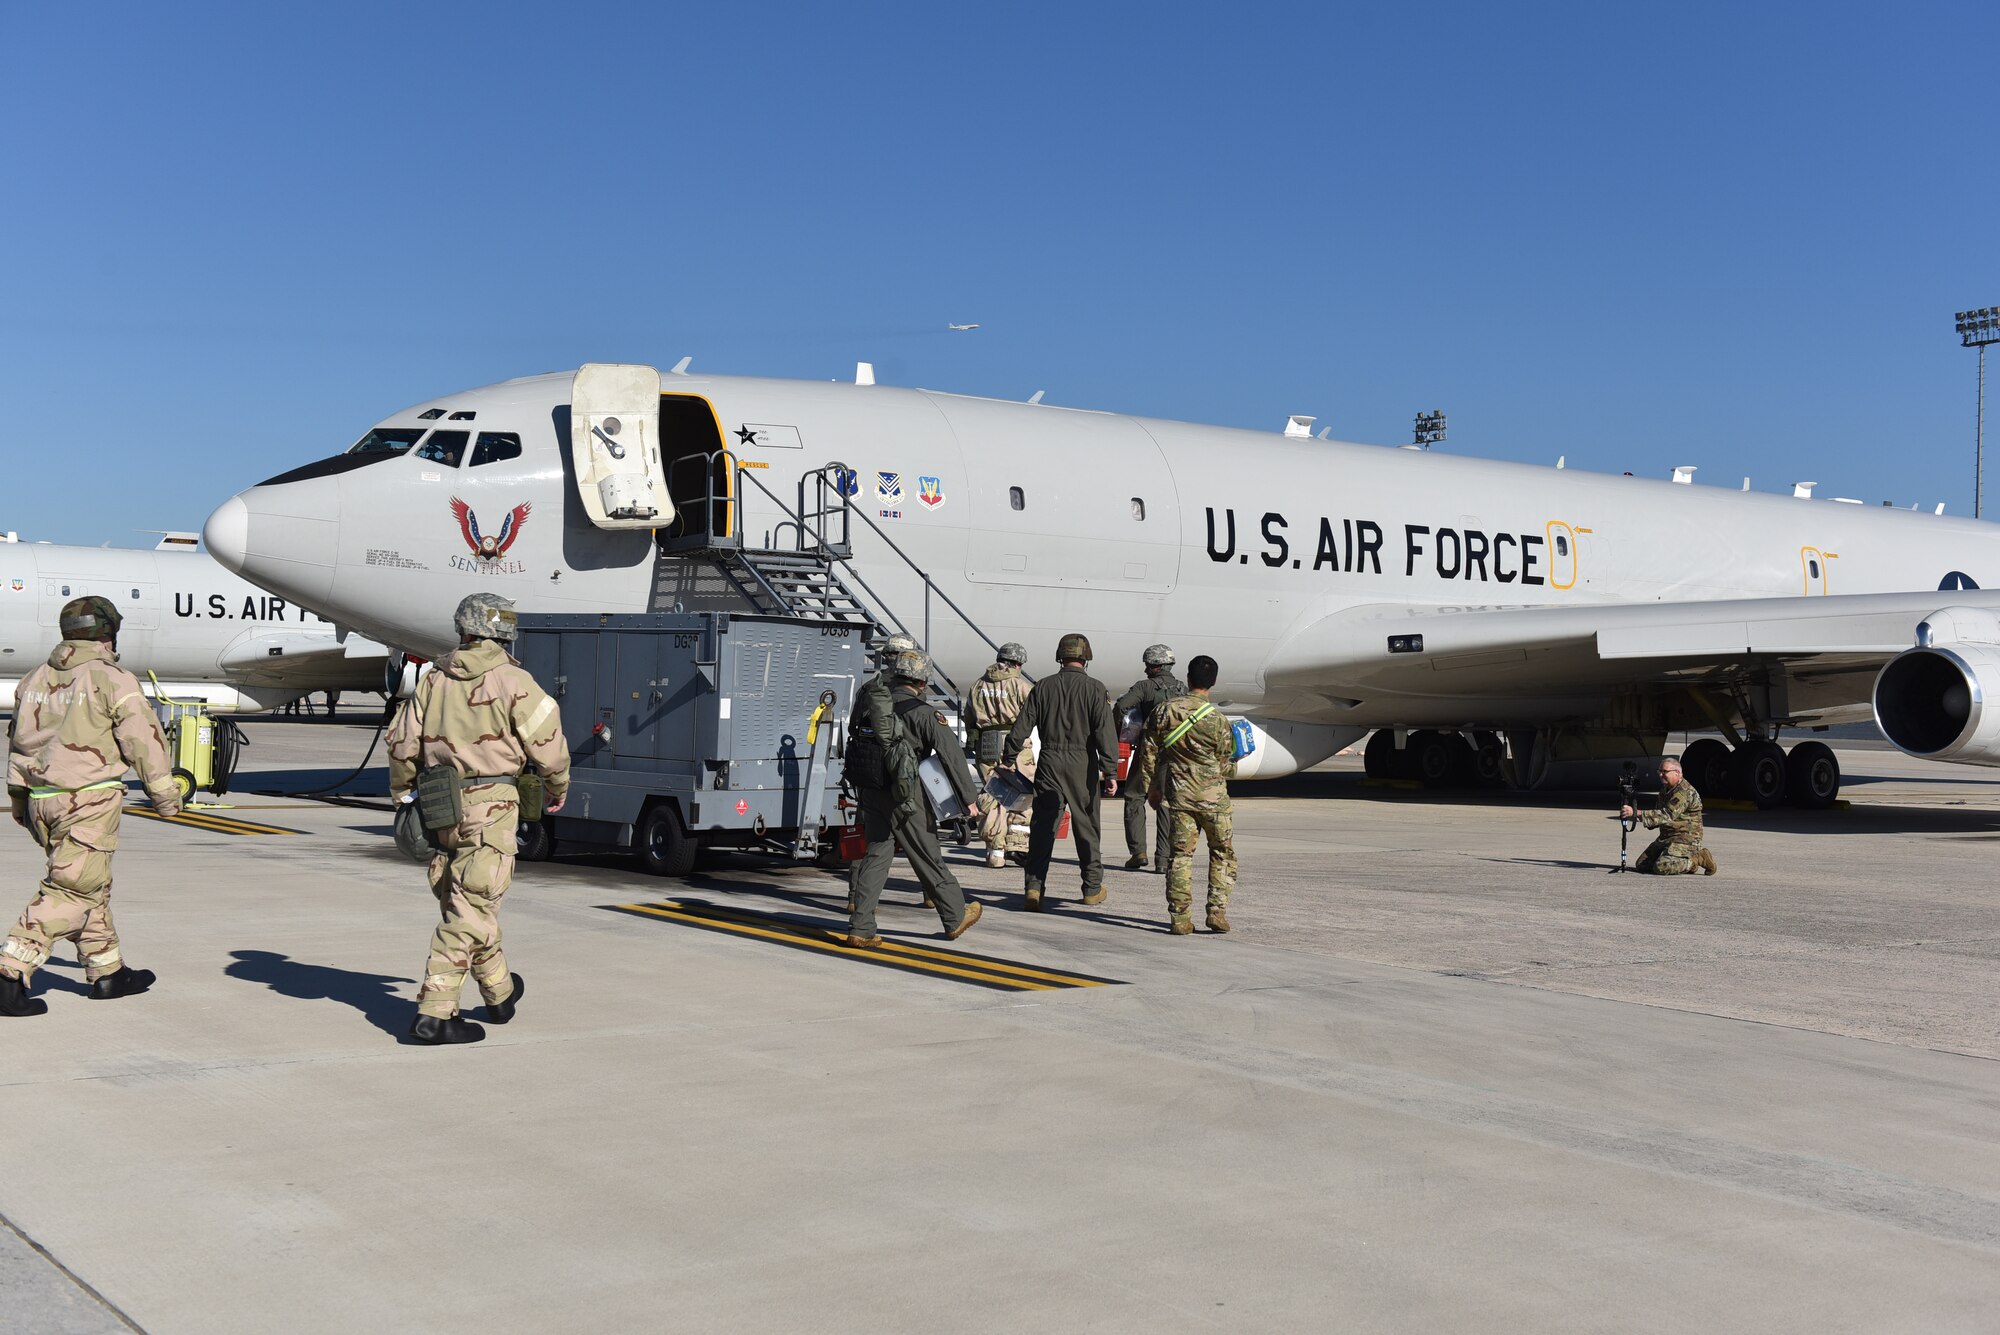 Photo shows Airmen walking up stairs into an aircraft.